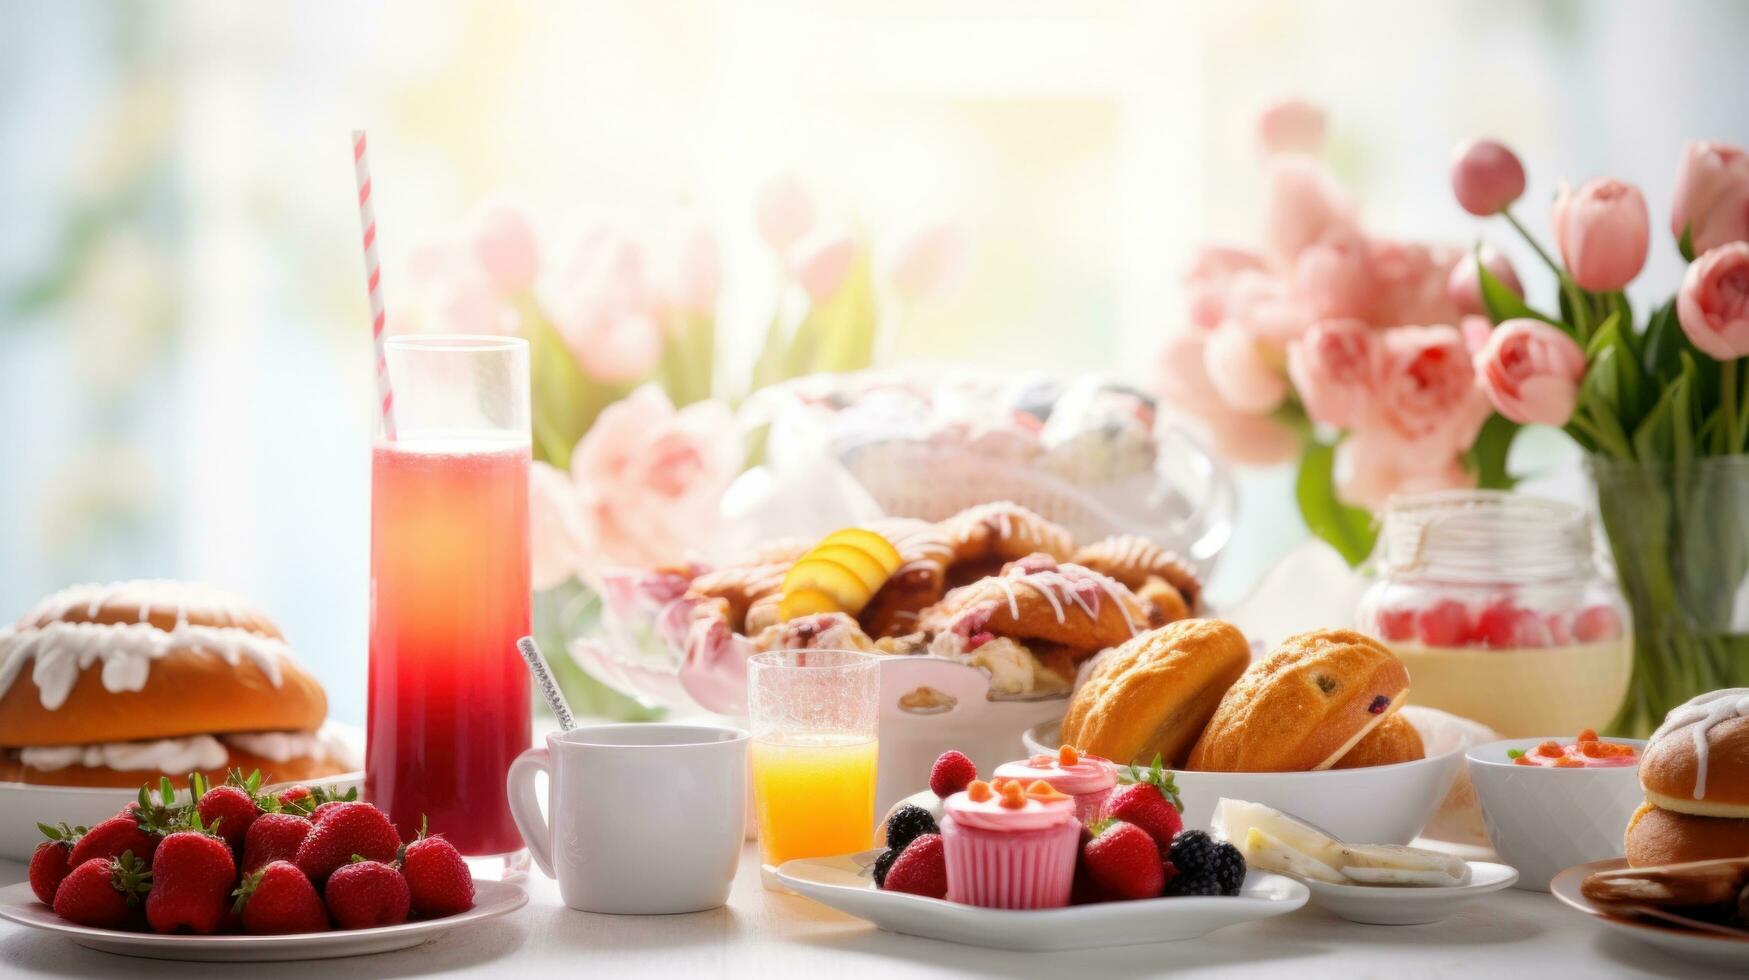 AI generated Easter brunch items, including pastries, fruits, and beverages, set against a festive background photo